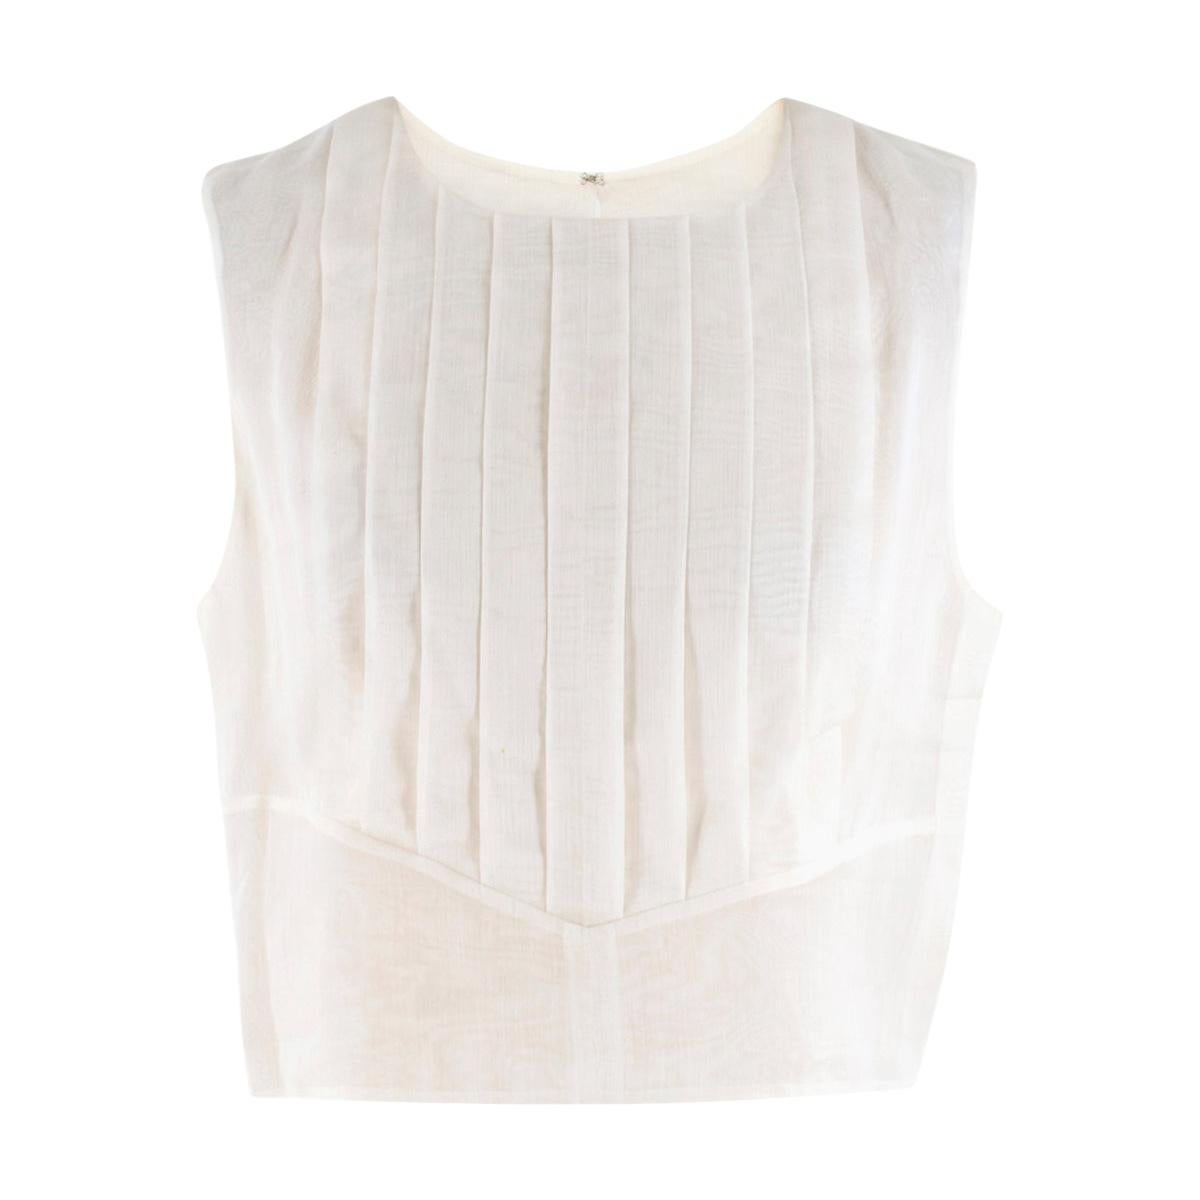 Chanel Cropped White Pleated Silk Top - Size US 8